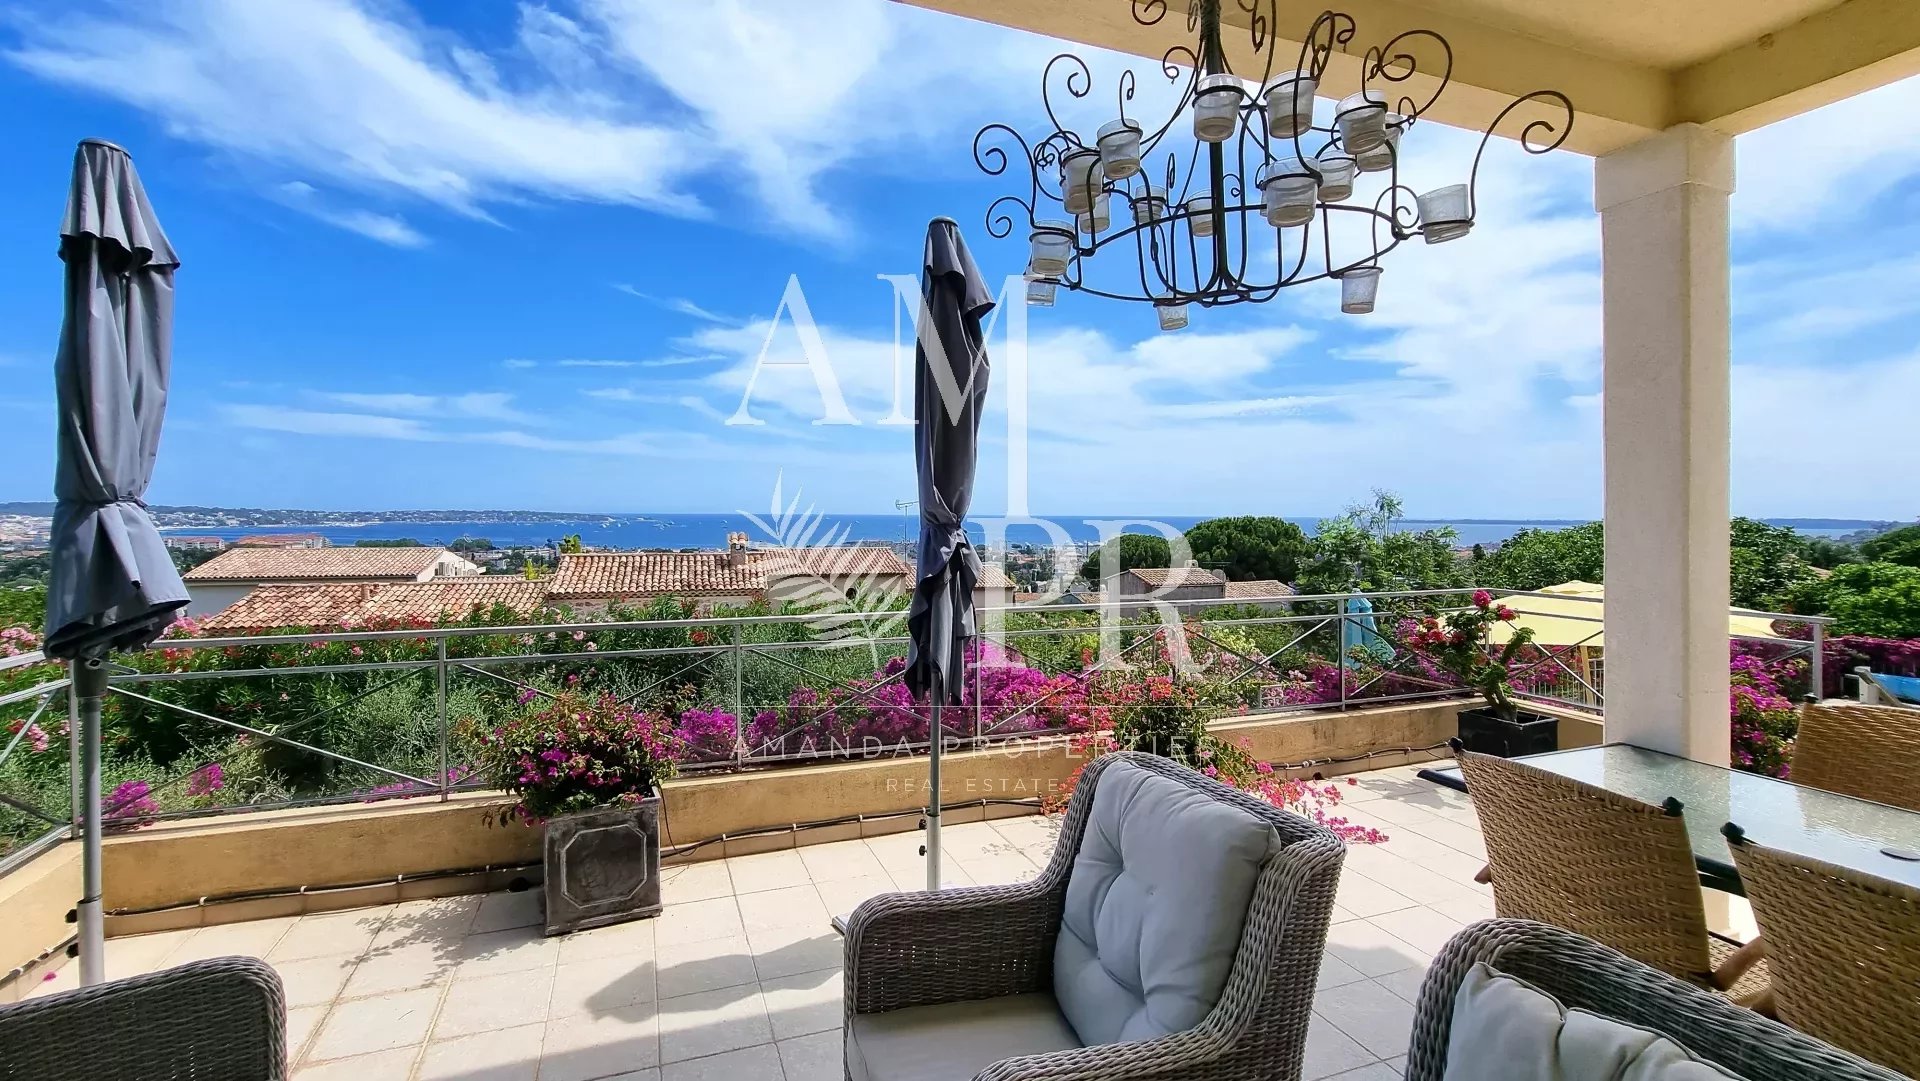 Charming villa on gated estate with sea view near beach